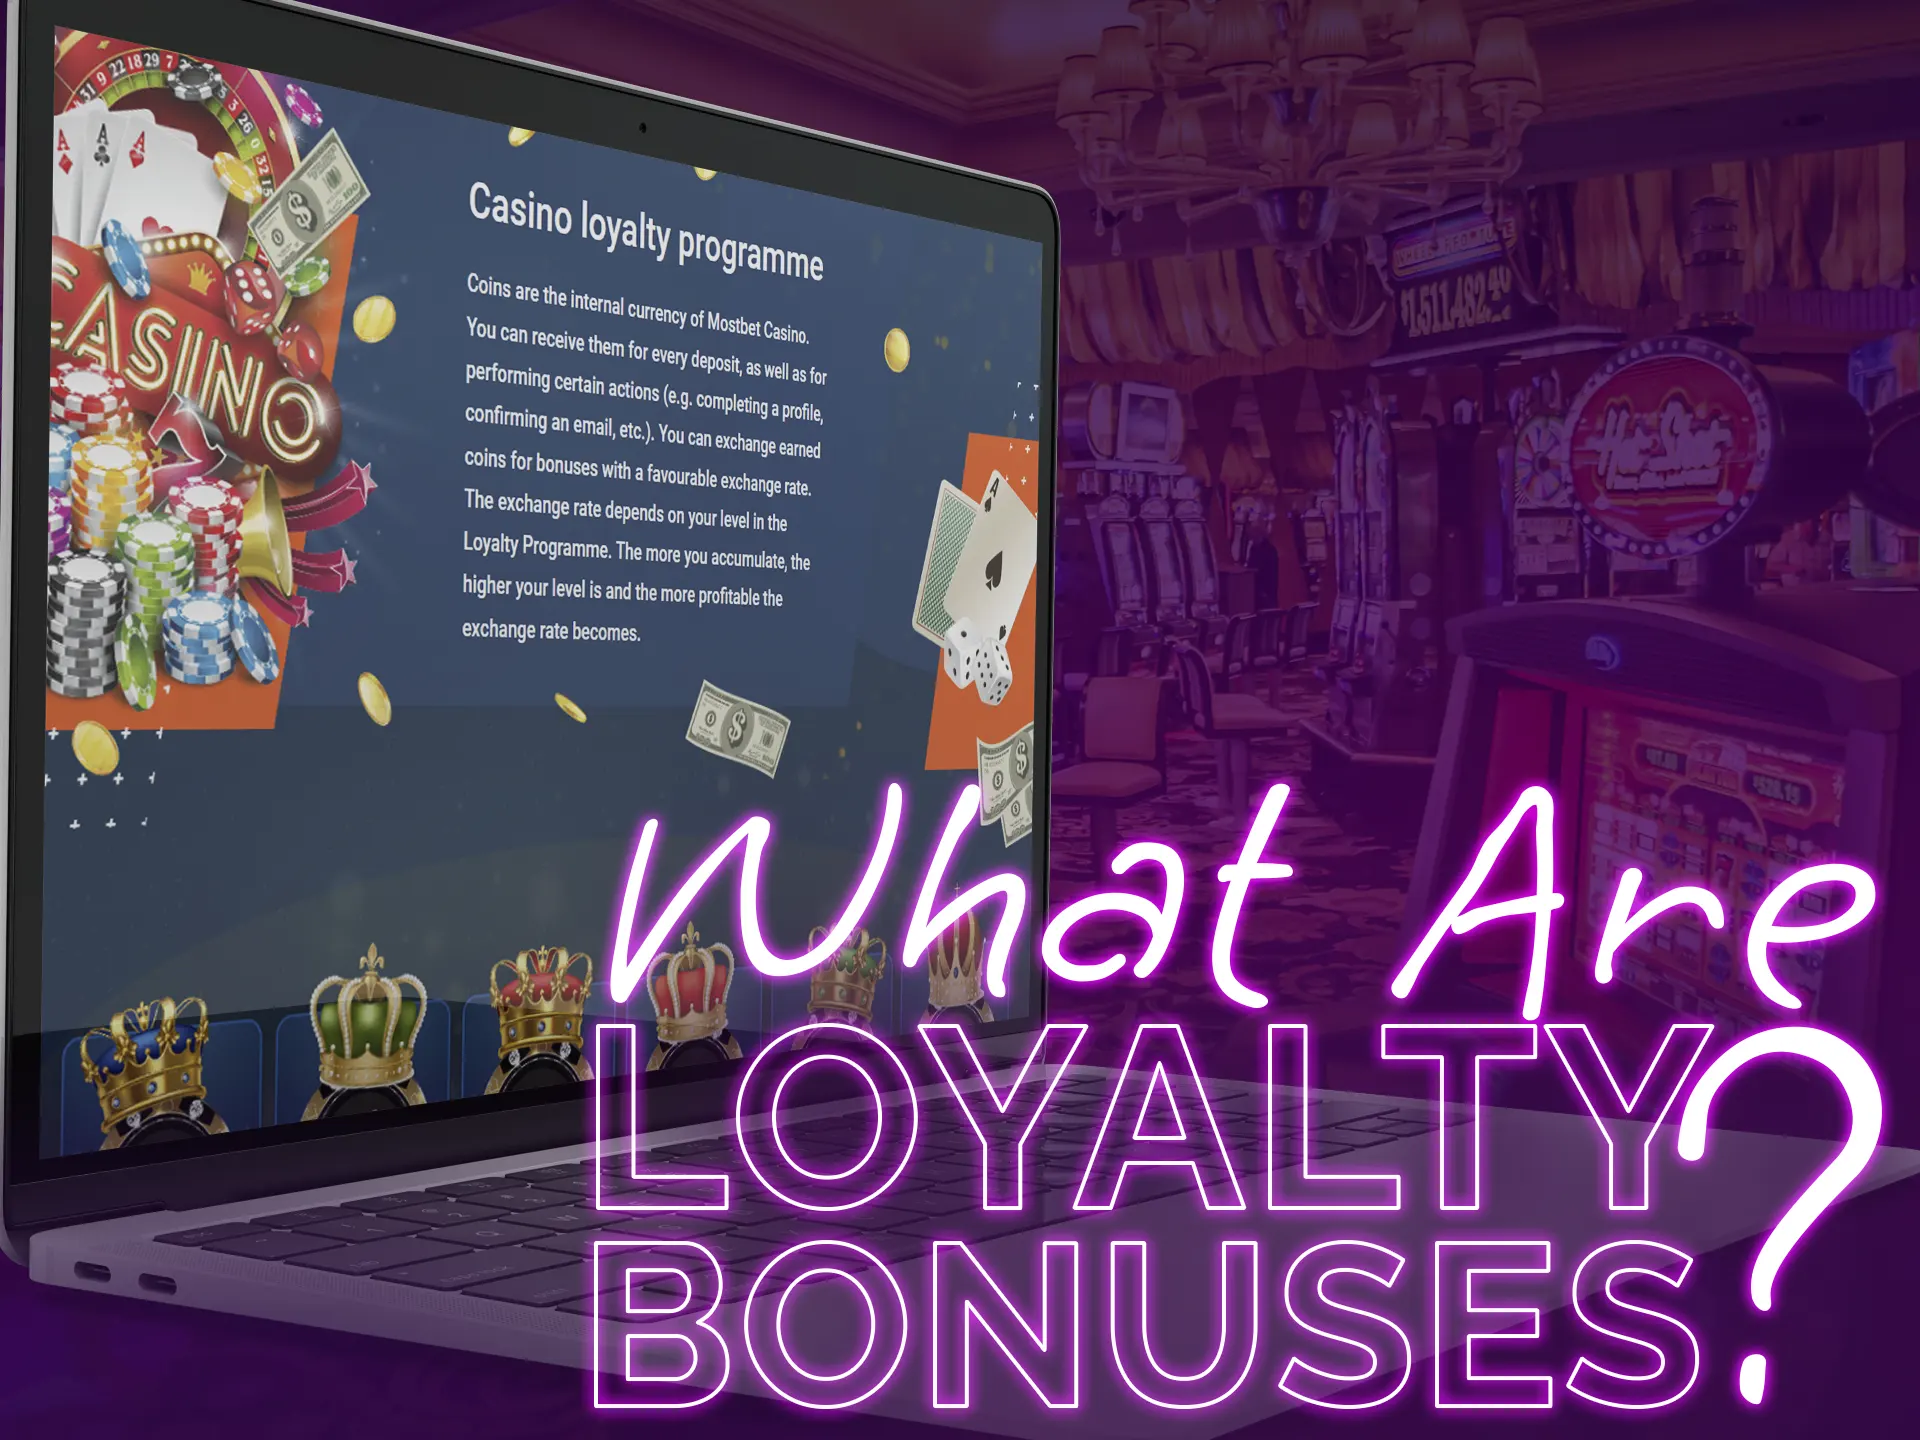 Learn what loyalty bonuses are.